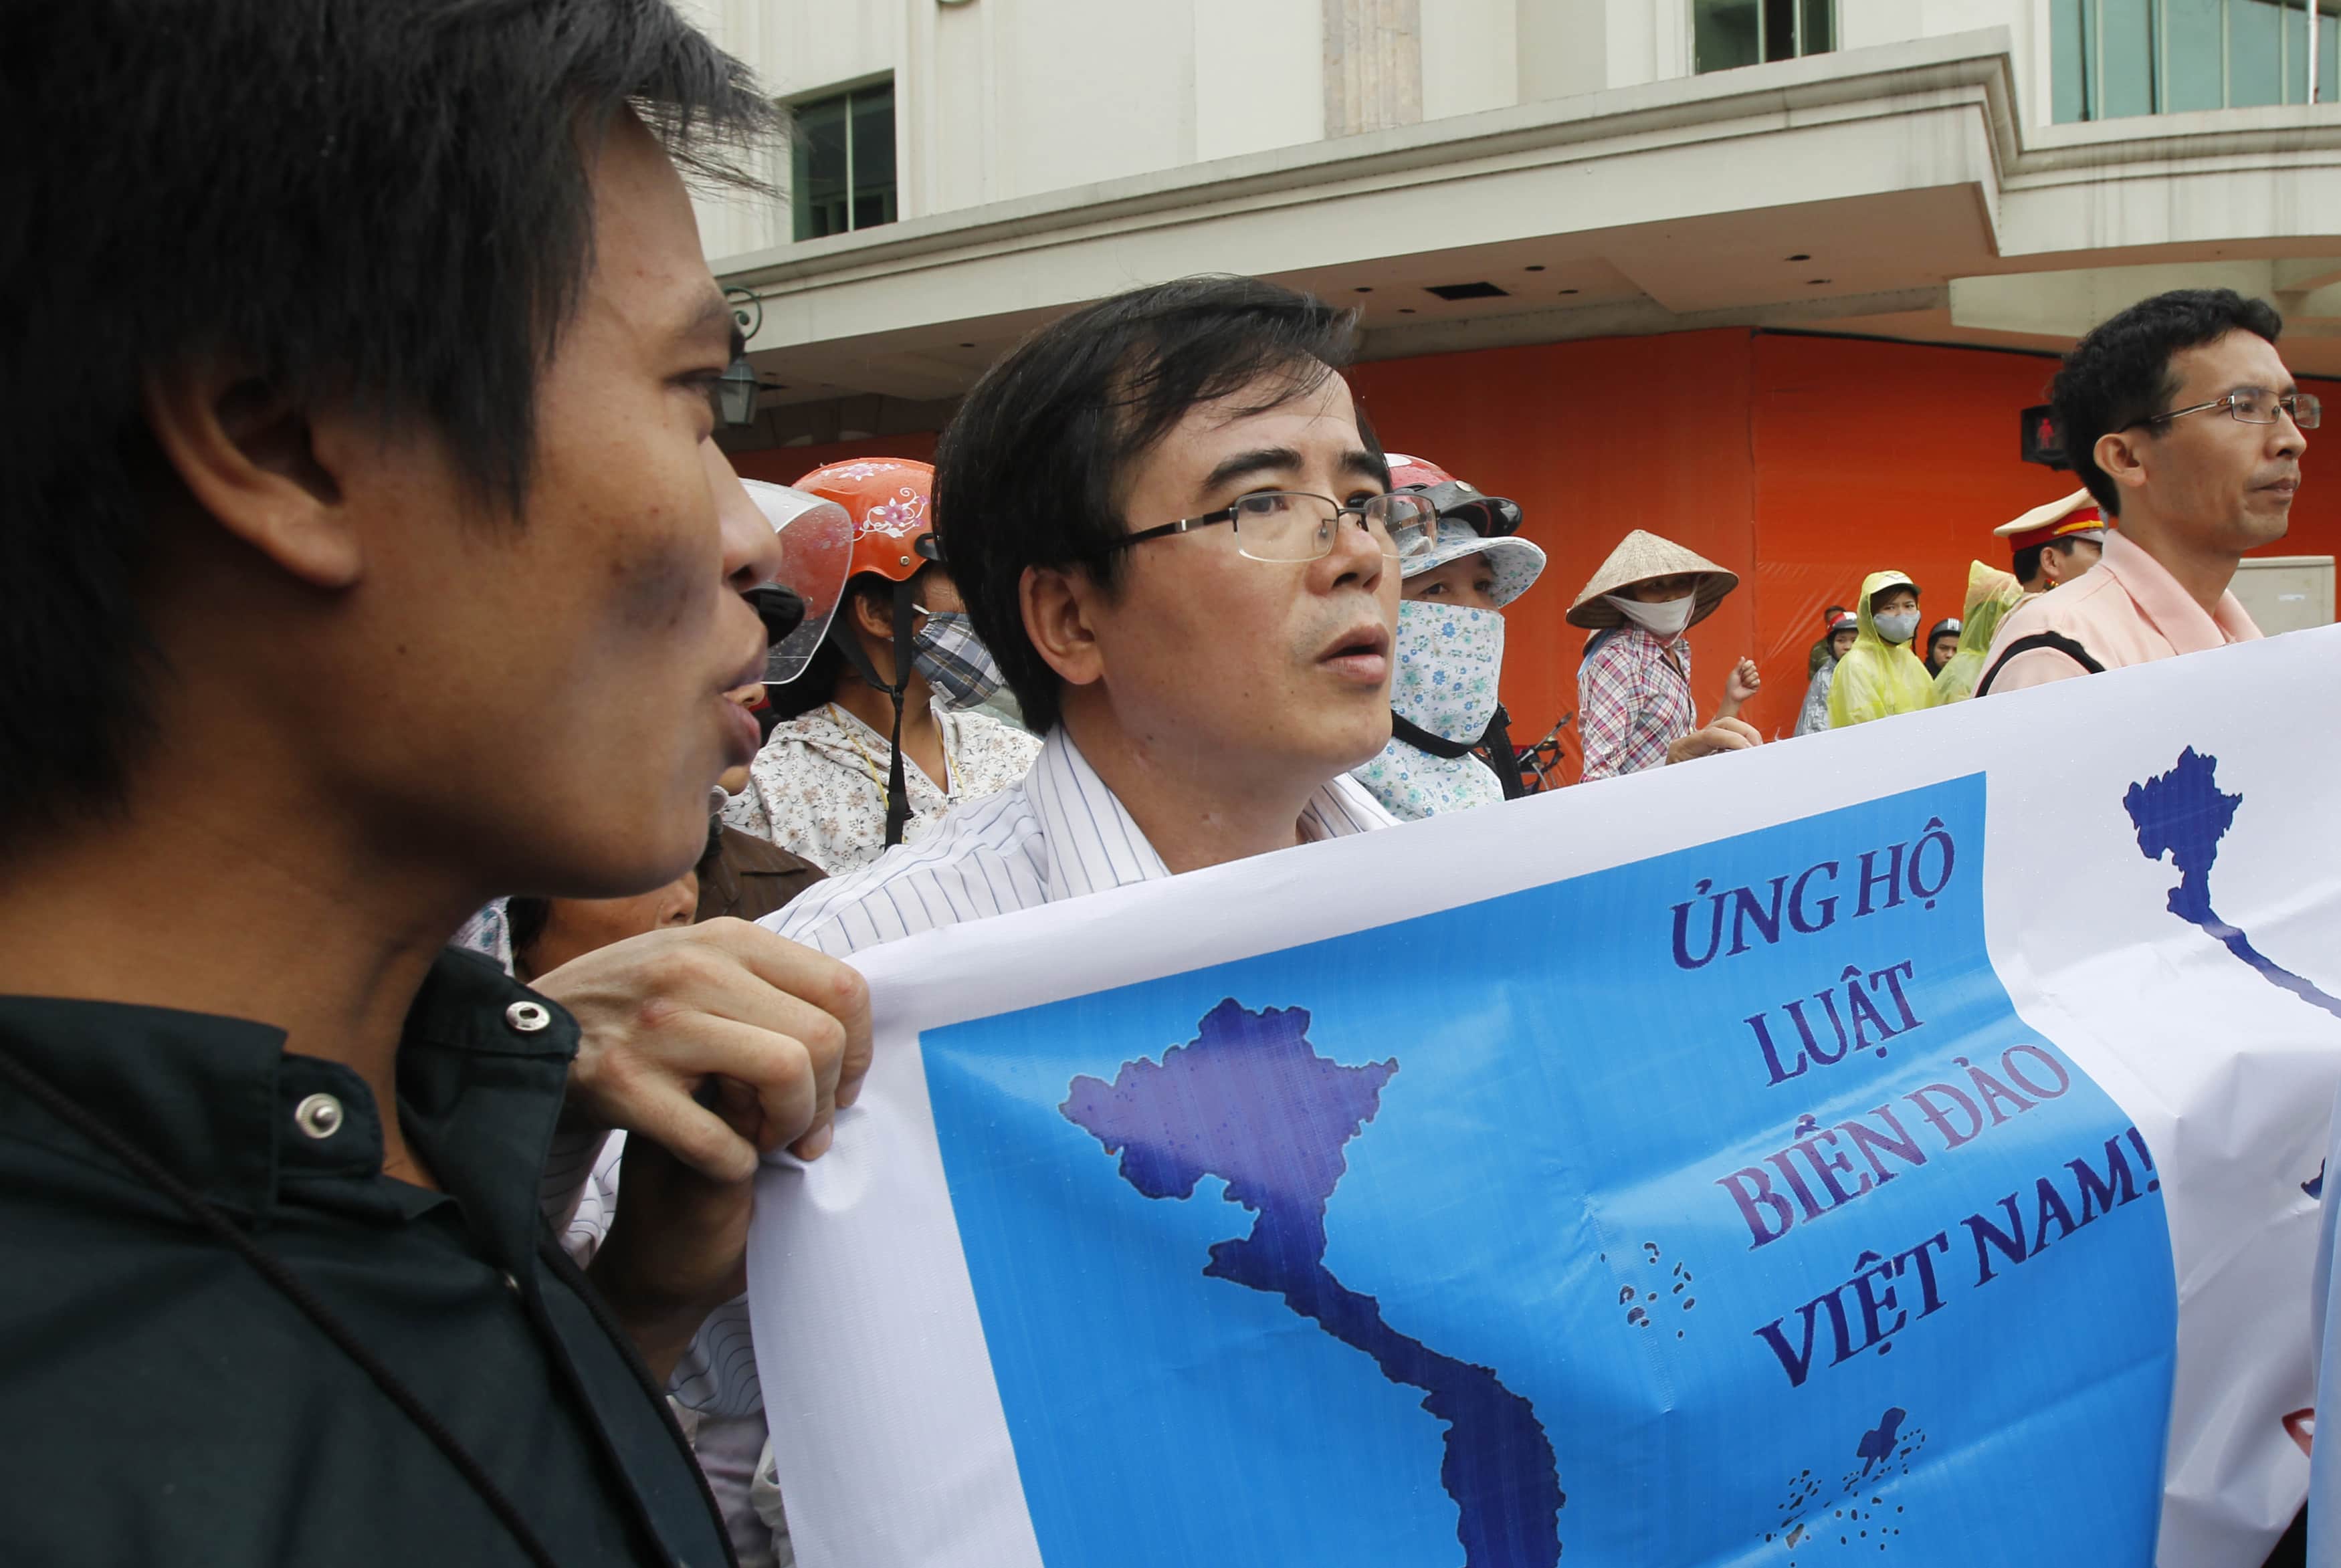 Lawyer Le Quoc Quan (C) pictured during a protest in Hanoi, 8 July 2012; the banner reads "support for Vietnam maritime law", REUTERS/Kham